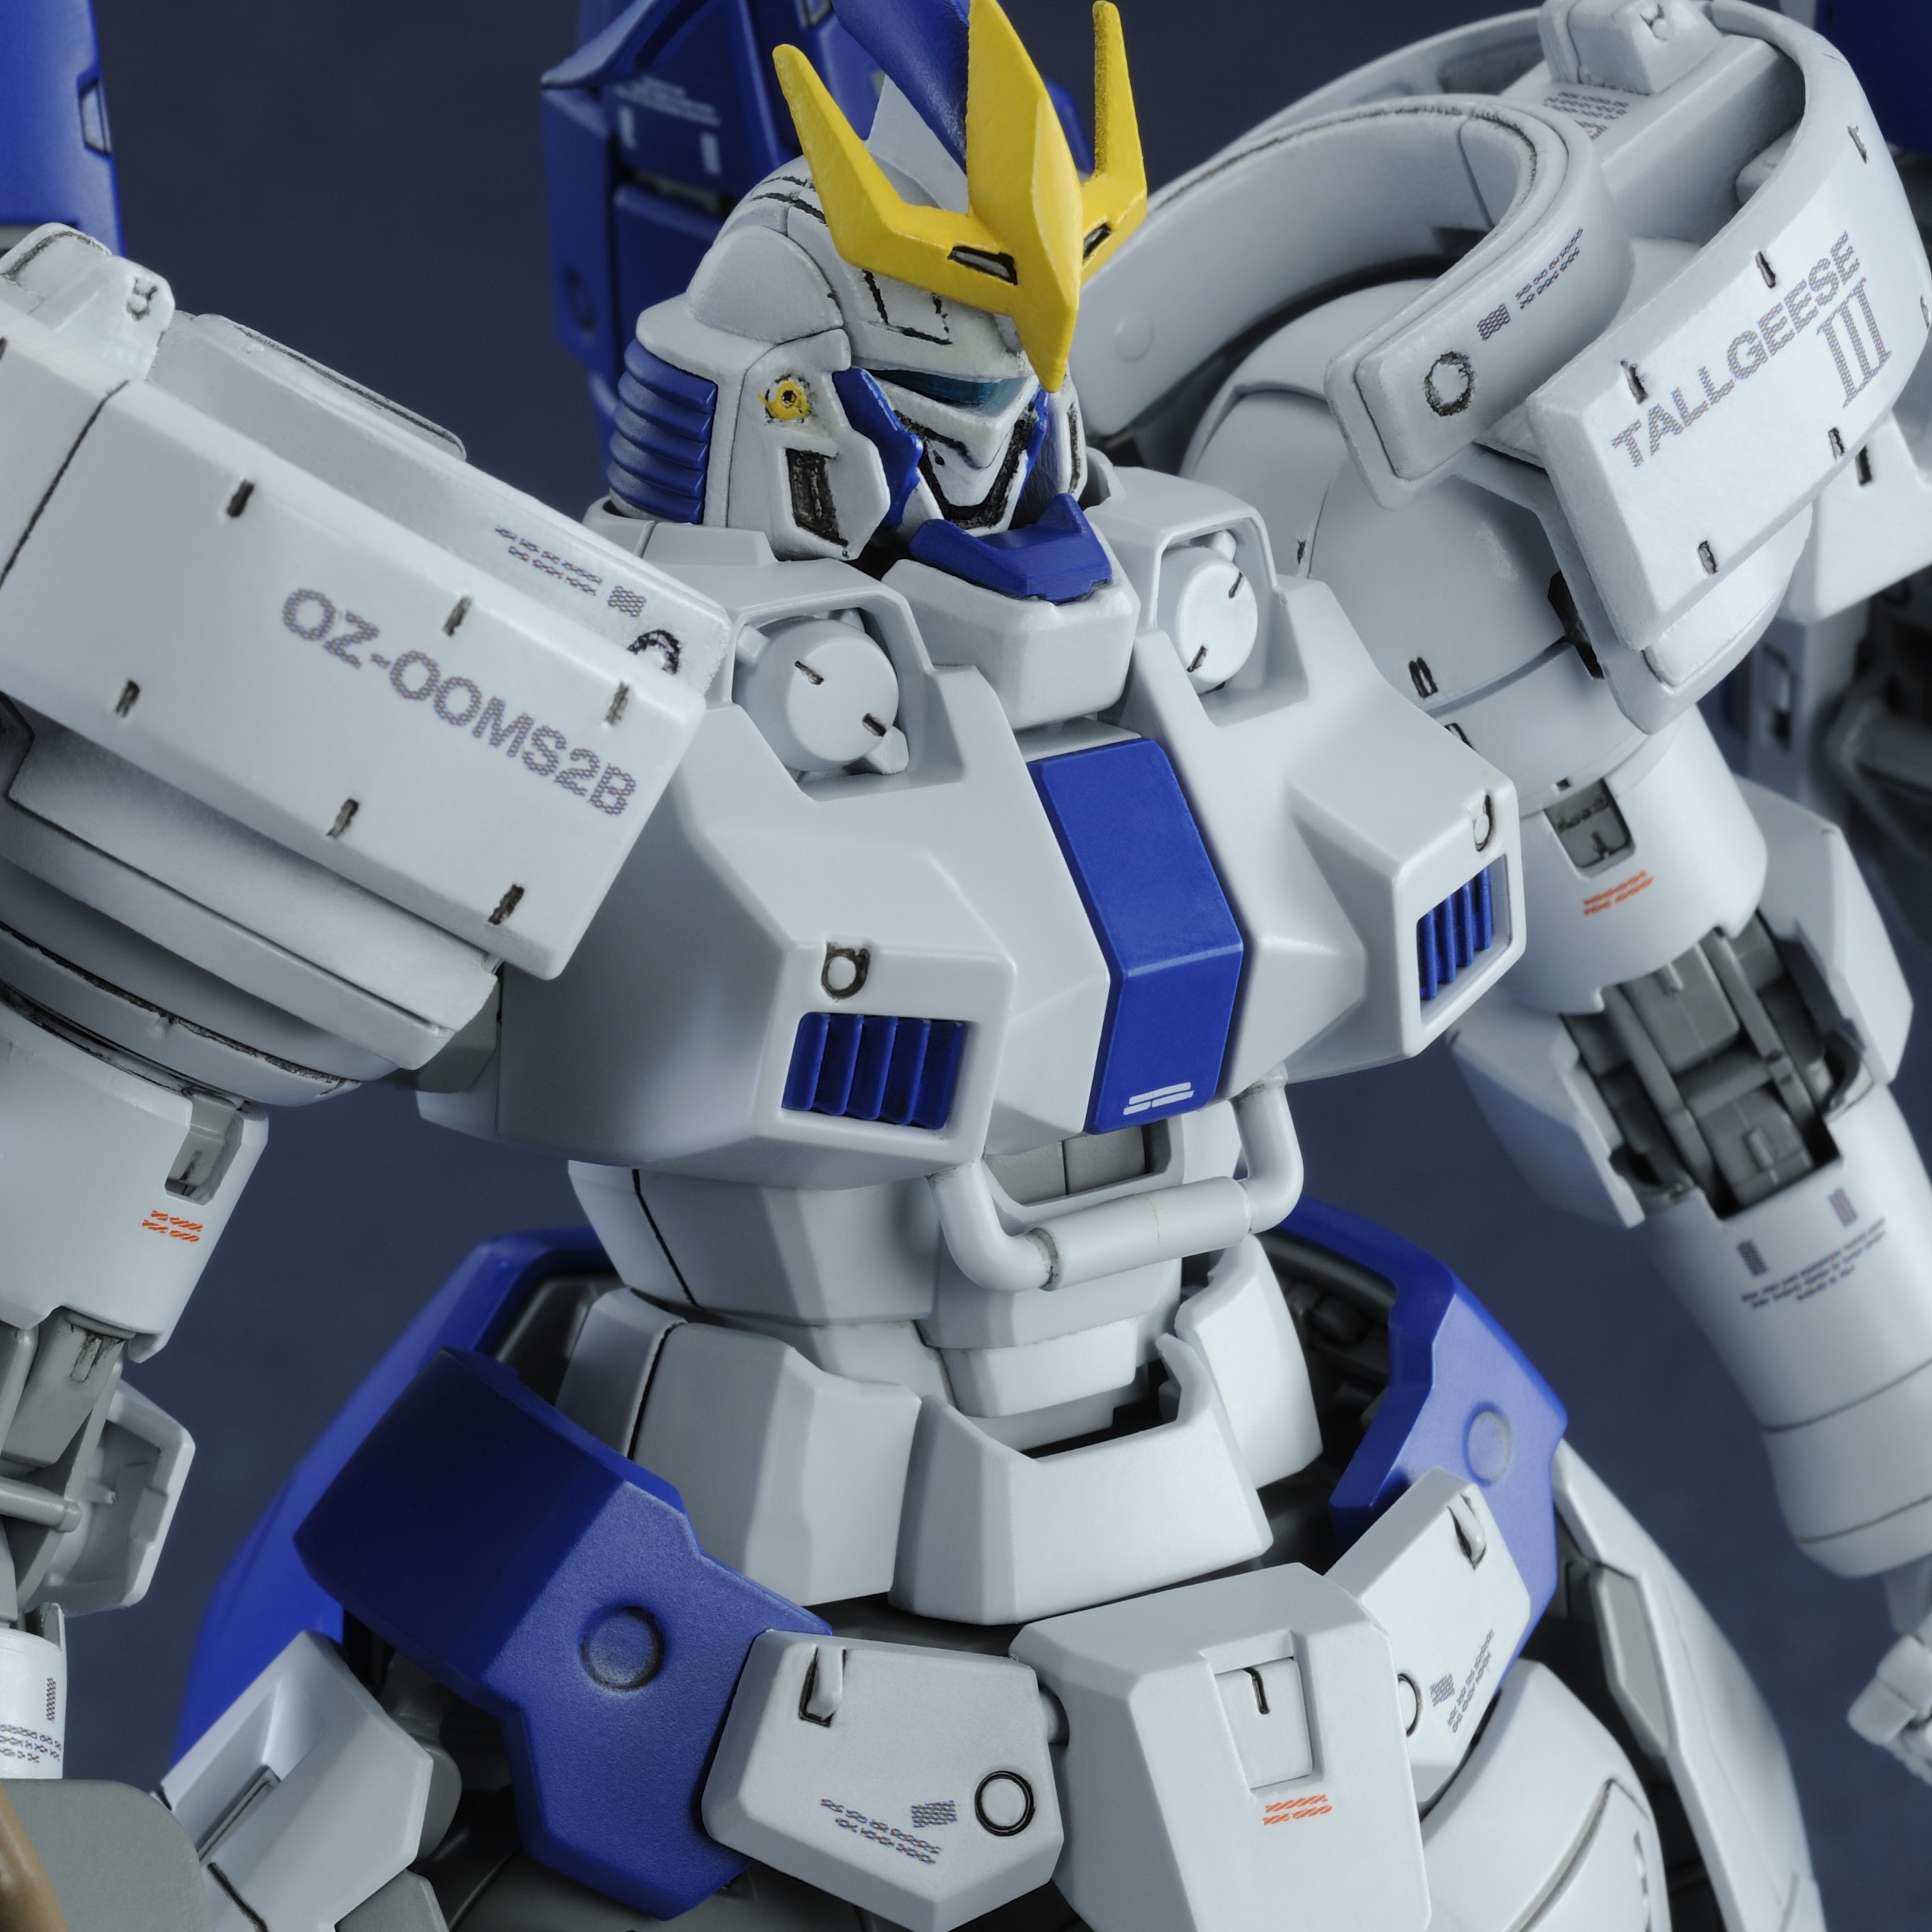 MG 1/100 TALLGEESE III[Jan 2021 Delivery]